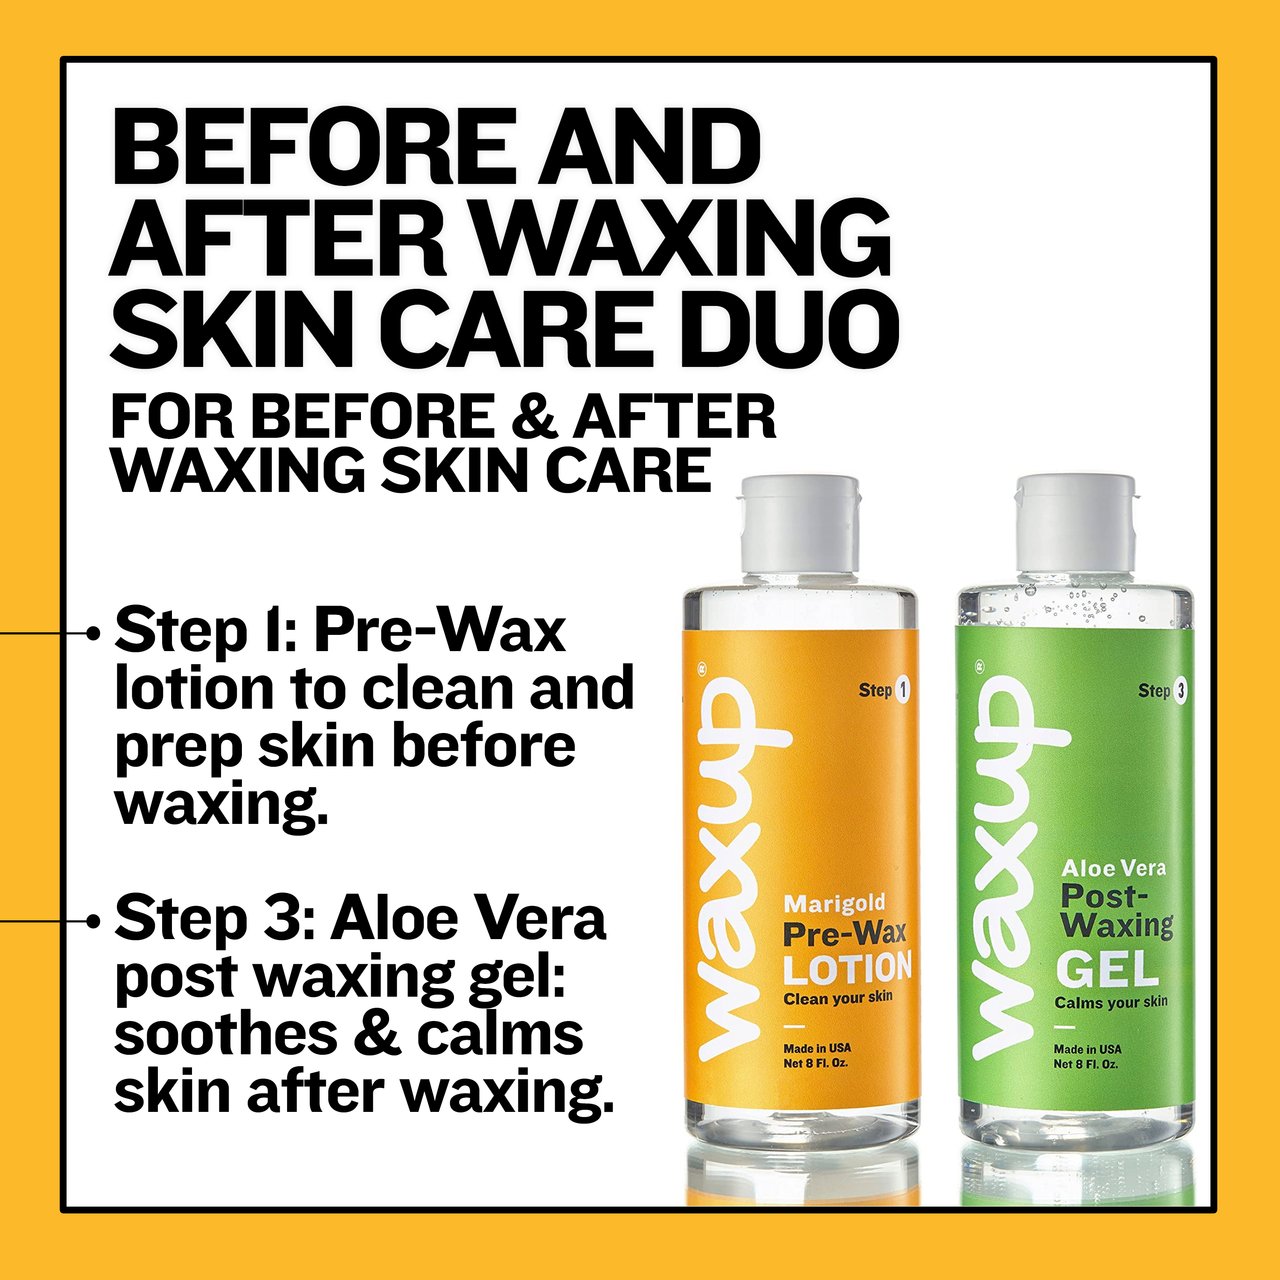 Before And After Waxing Skin Care Duo - thatswaxup -  - Pre and Post Waxing Skin Care - waxup hair removal wax body waxing kit women and men professional waxing supplies